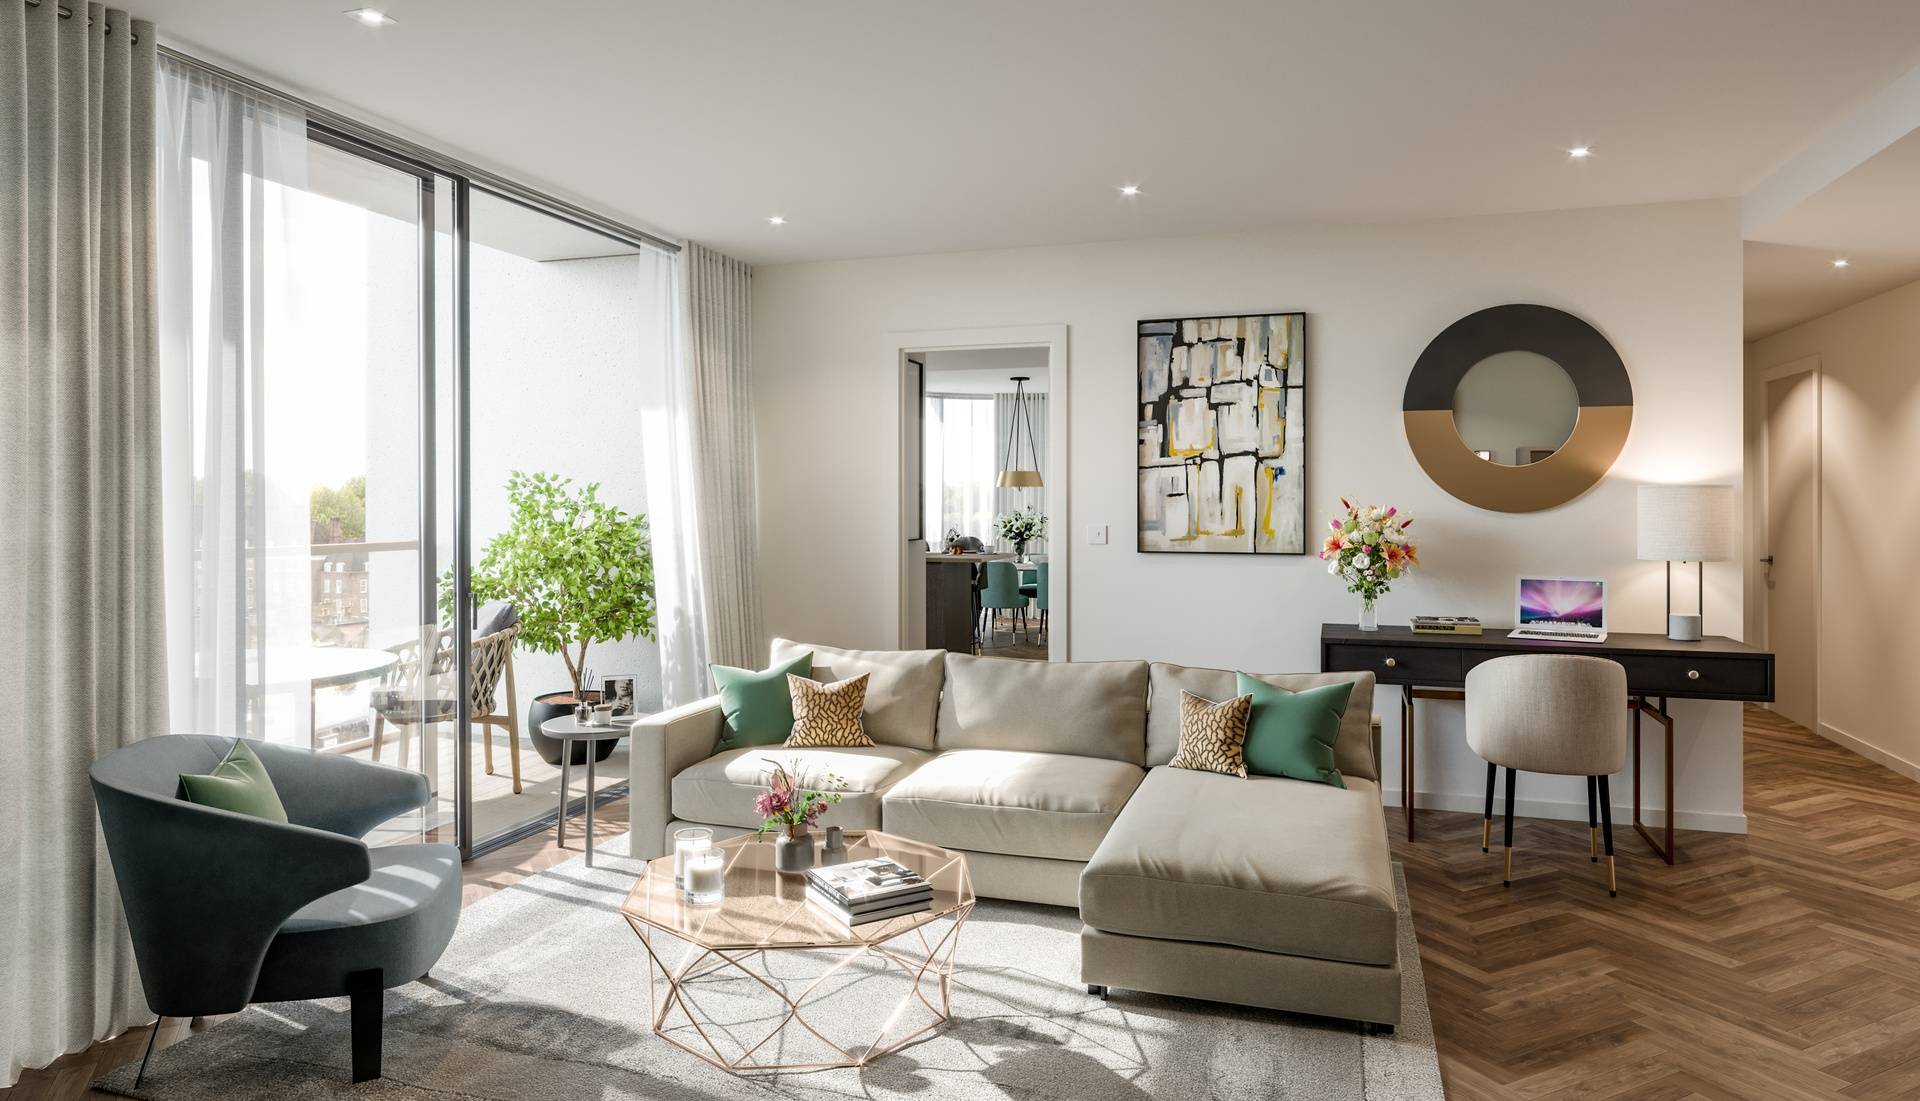 Three bed and three bath residence at King’s Road Park development forming a stylish collection of apartments set within six acres of beautiful landscaping including a public park, square and residents’ garden.